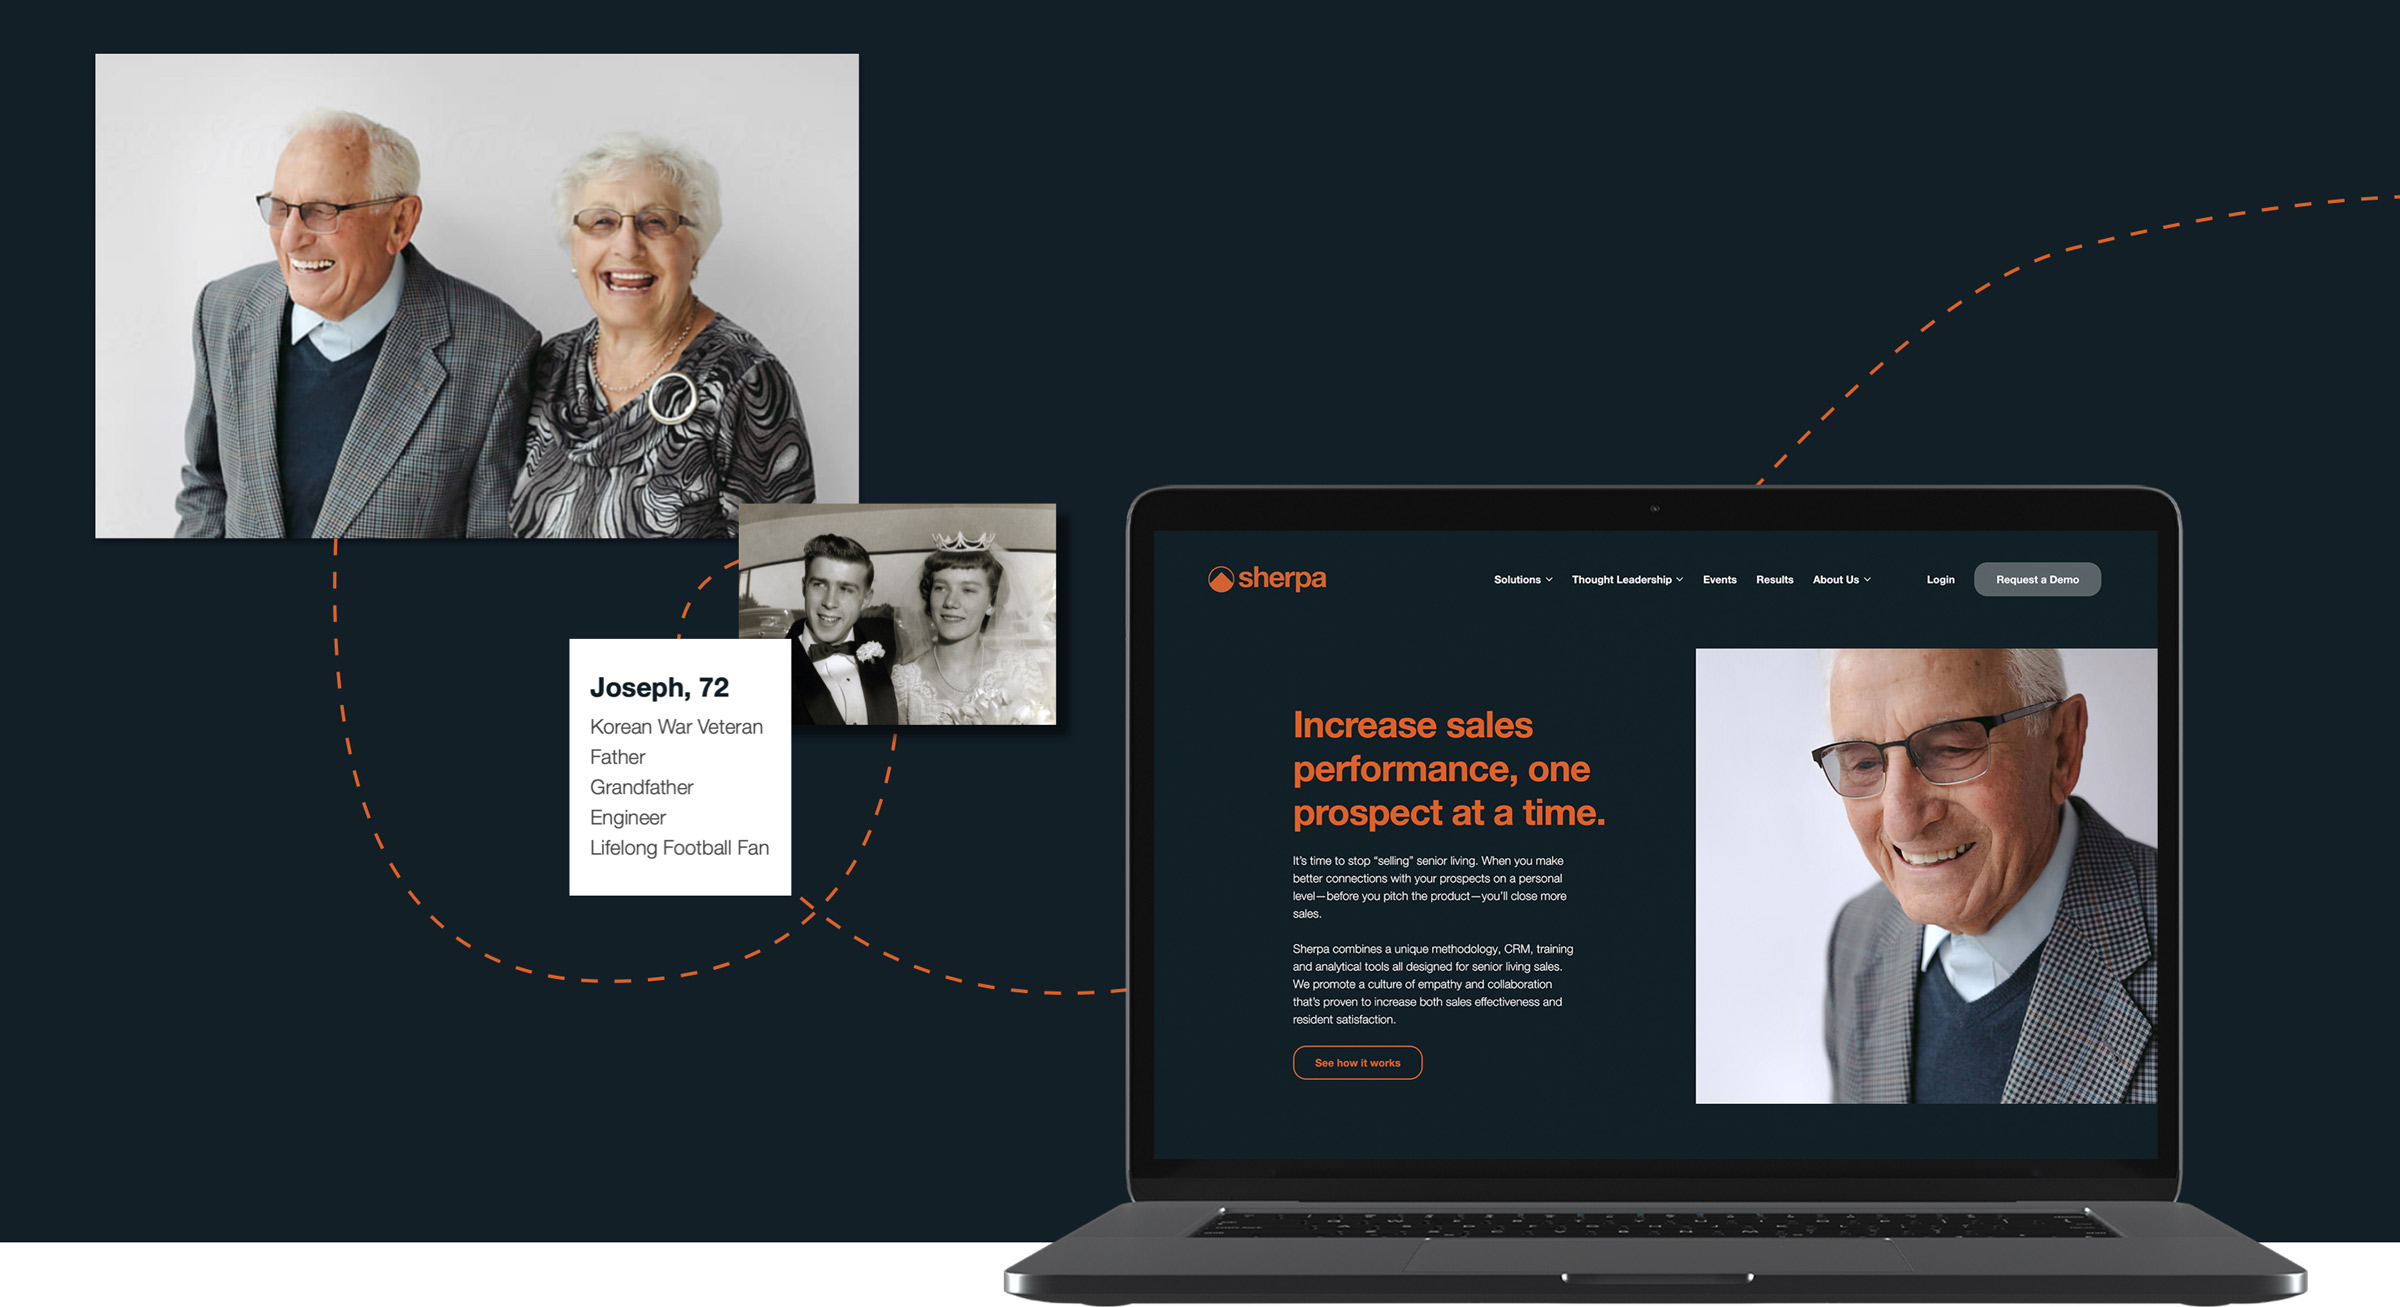 Sherpa's website design features photos and stats of senior living prospects